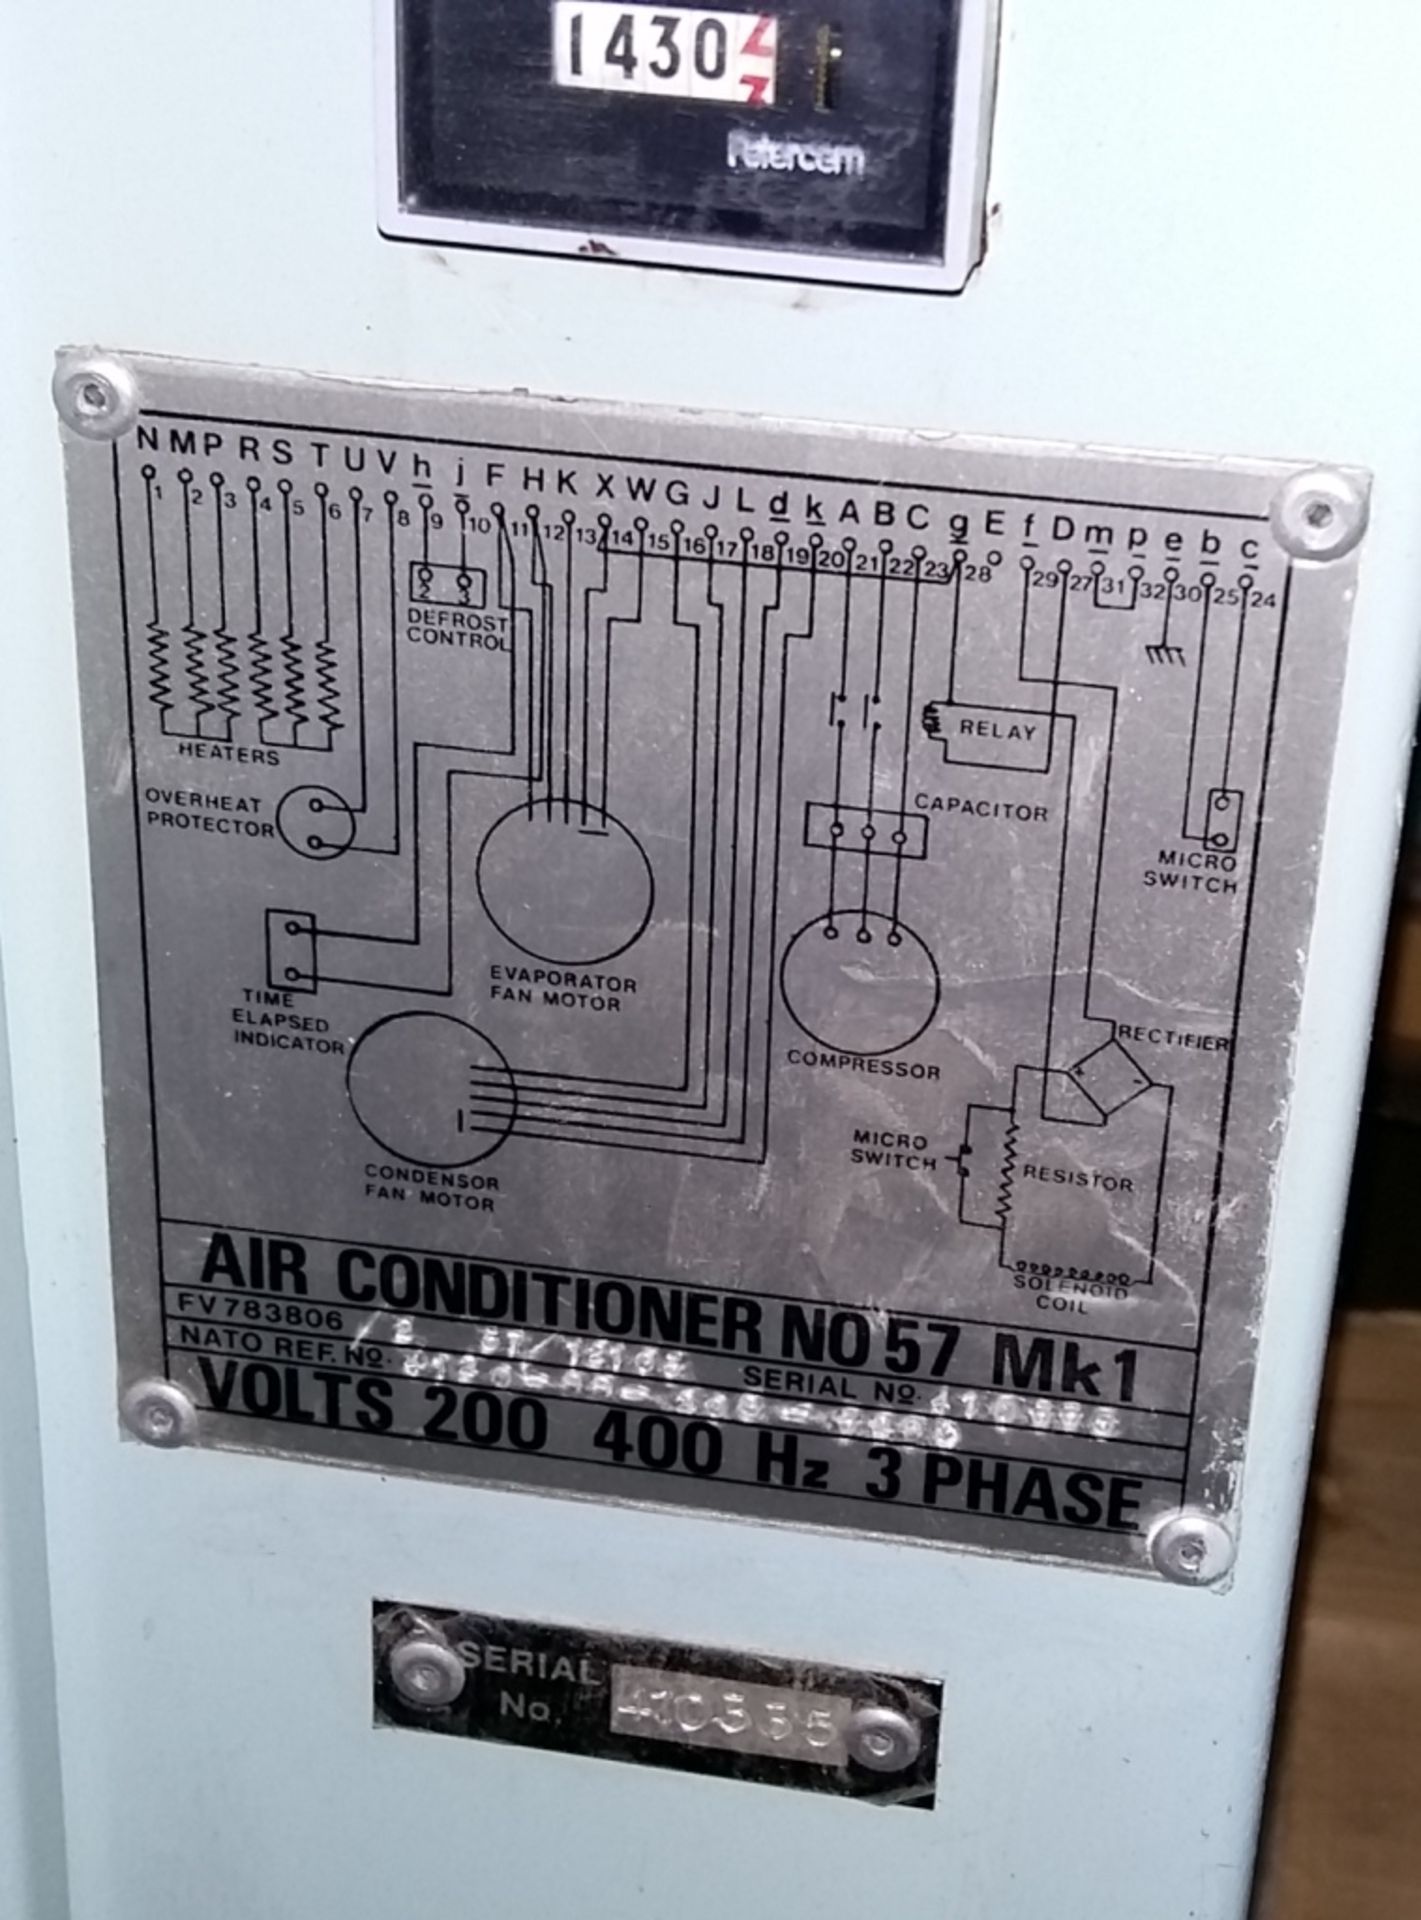 Air Conditioning no.57 MKI 200V 400hz 3 phase - Image 2 of 2